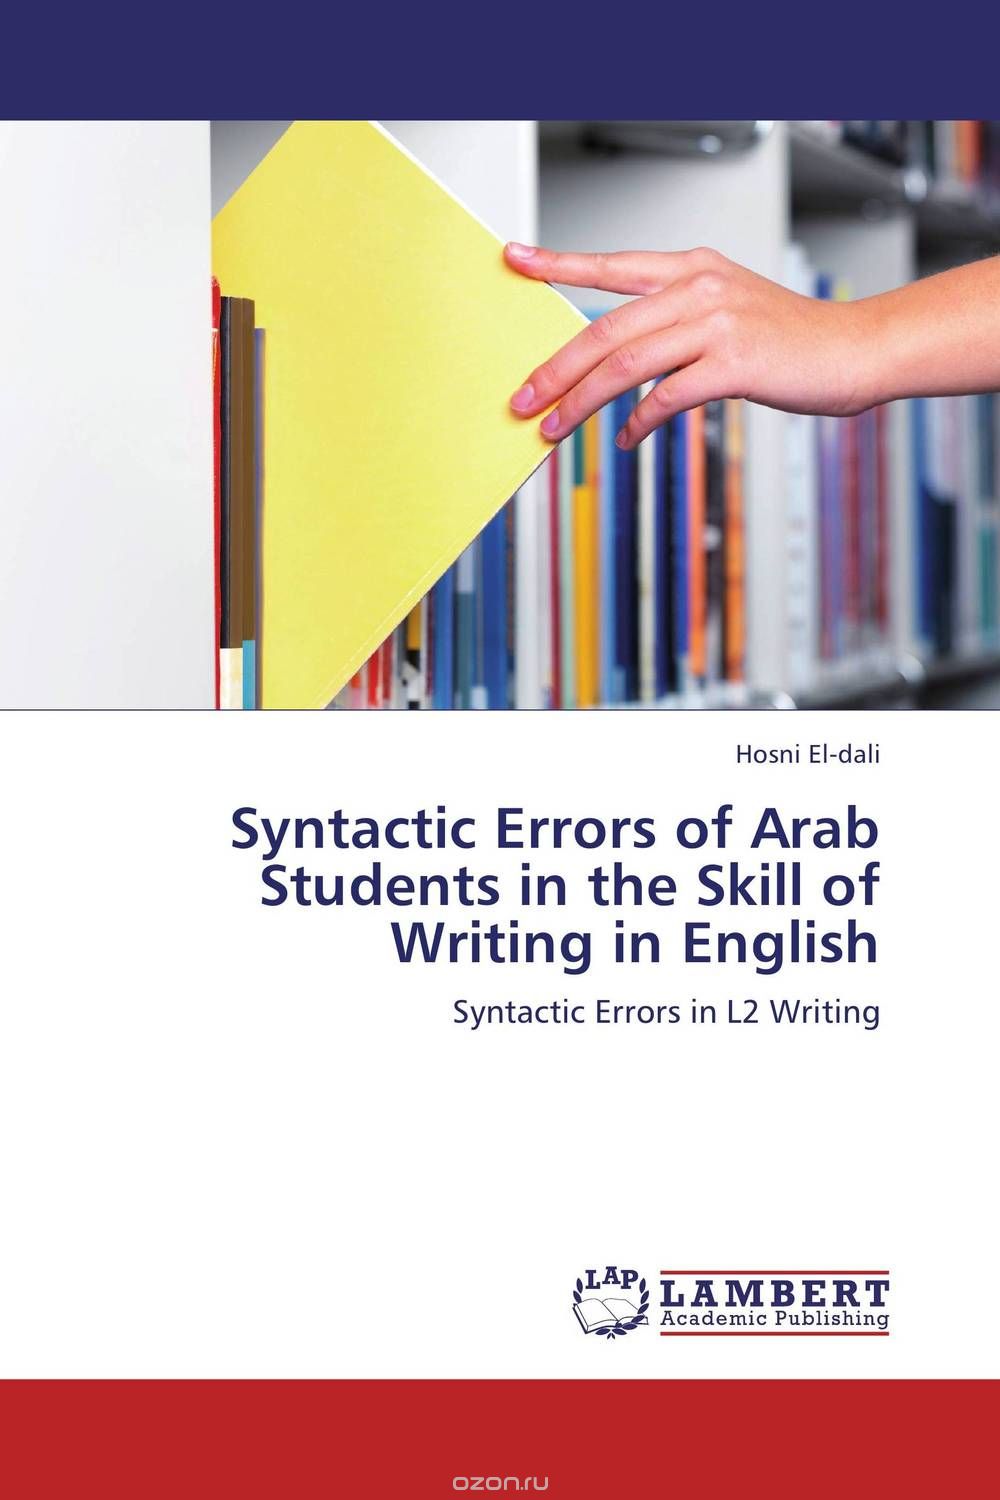 Syntactic Errors of Arab Students in the Skill of Writing in English